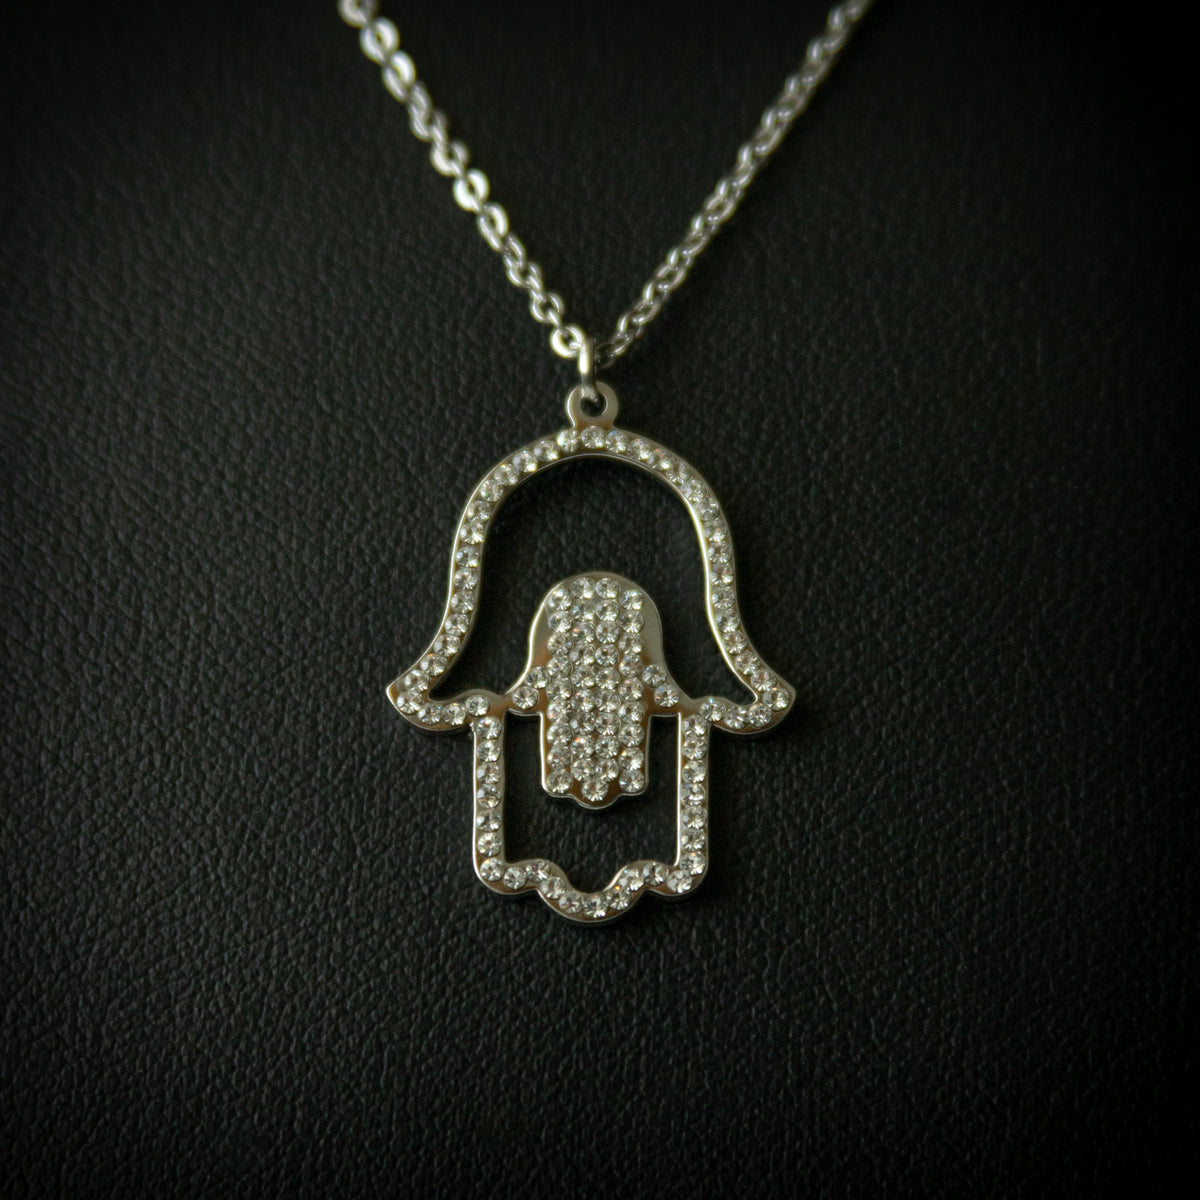 Open Hamsa Hand Pendent With Necklace - Silver with Clear Crystal Stones